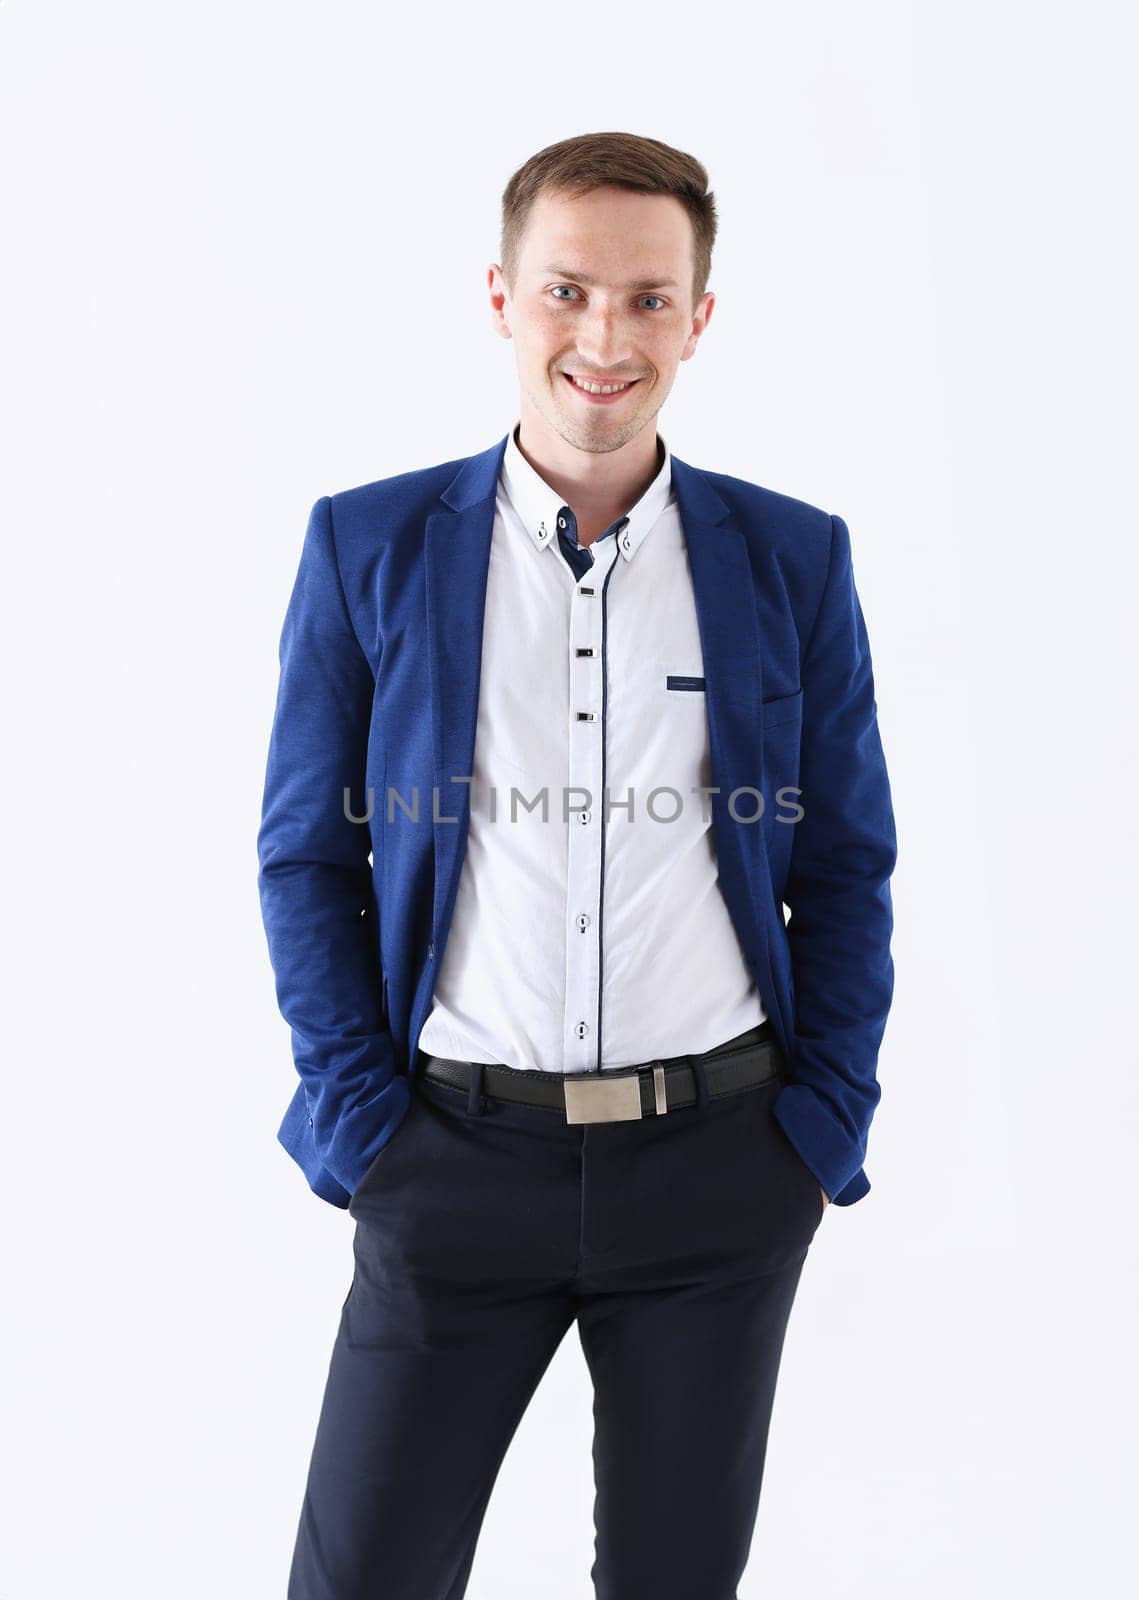 Handsome smiling man in suit and tie looking in camera portrait isolated background. White collar dress code modern office lifestyle graduate college study profession idea coach training concept